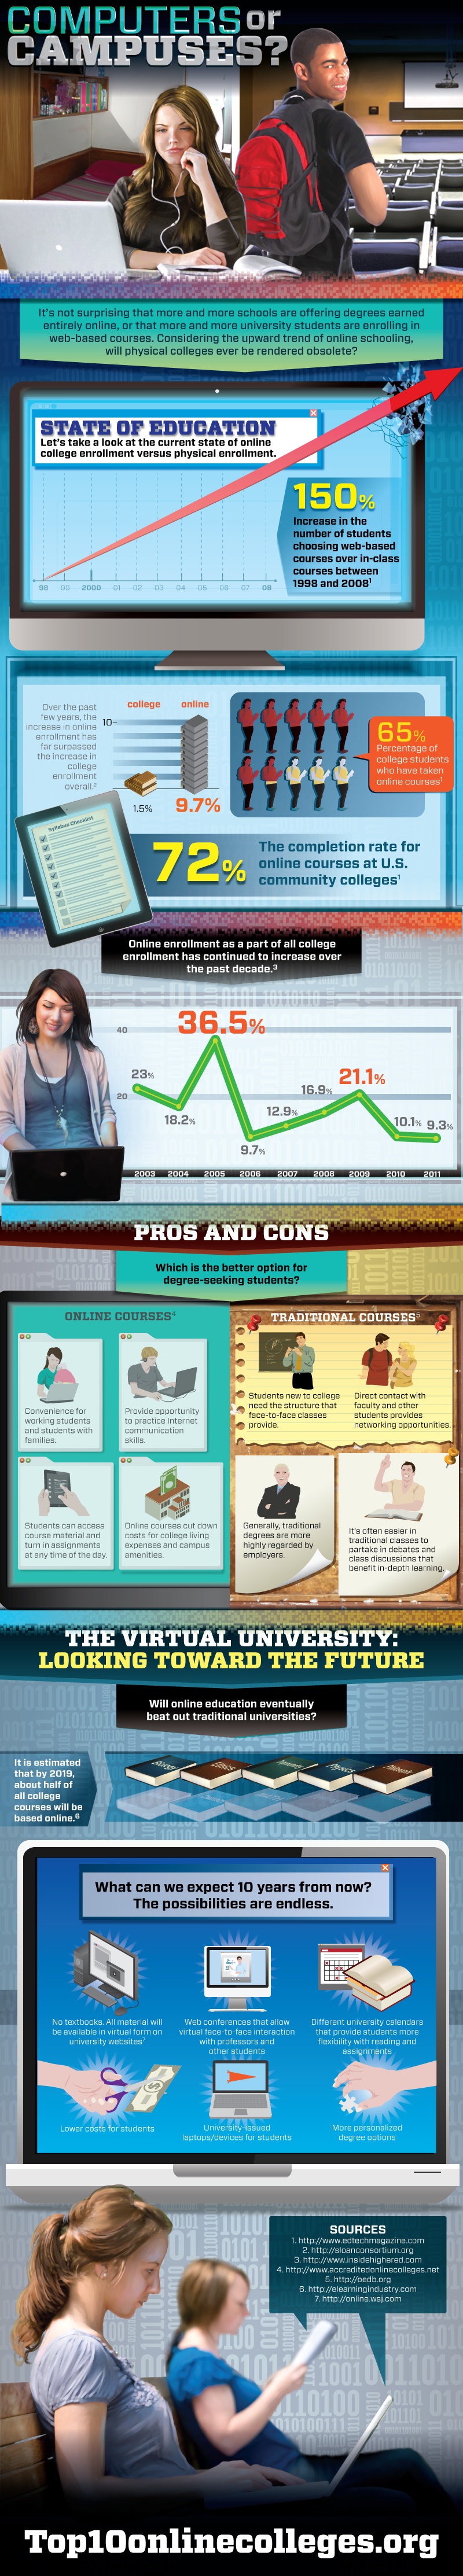 Online Education Infographic - Computers or Campuses?